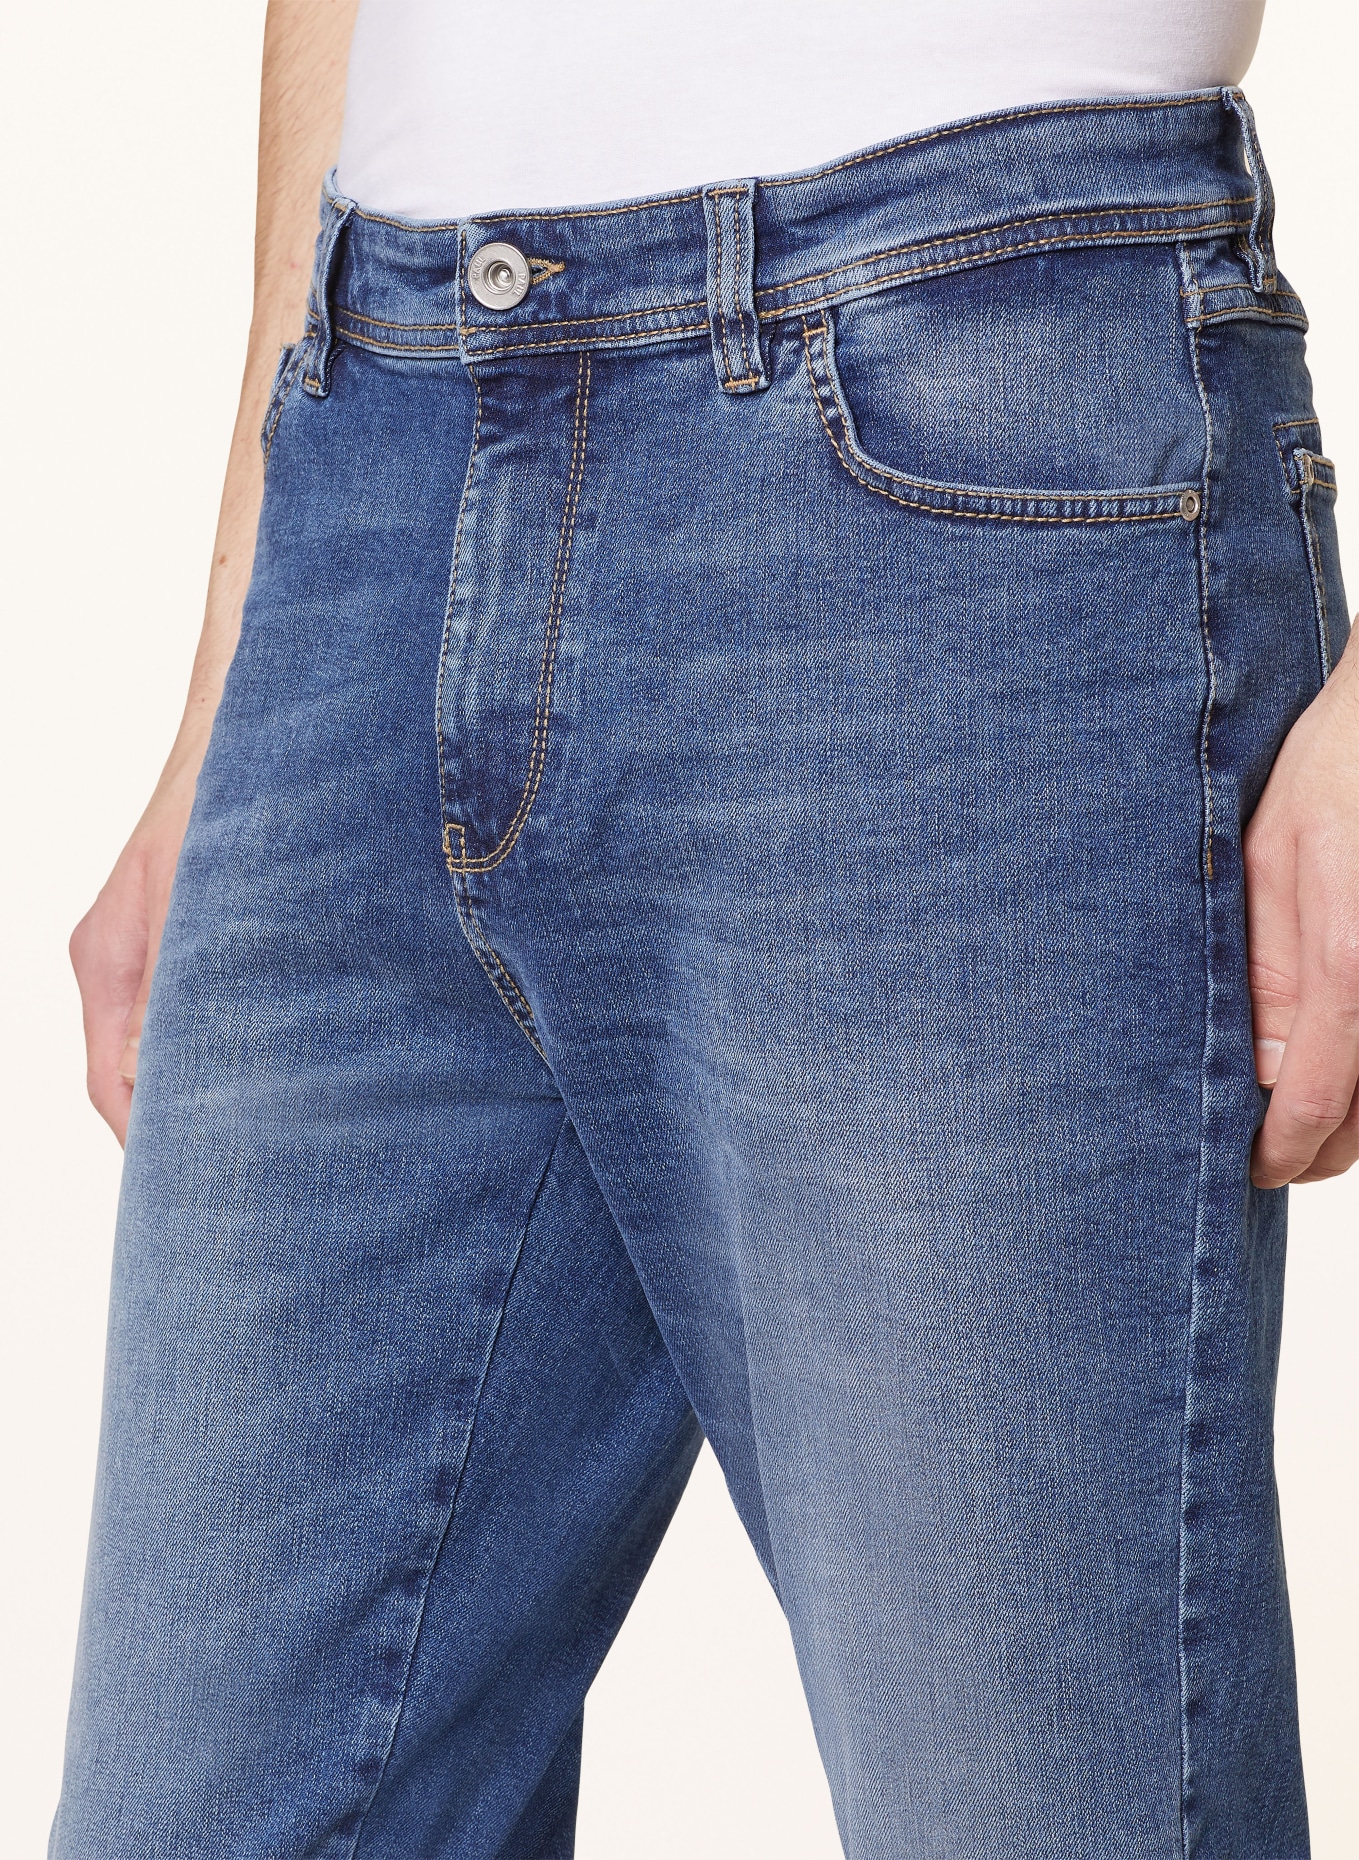 PAUL Jeans Tapered Fit, Farbe: 4348 mid blue (Bild 5)